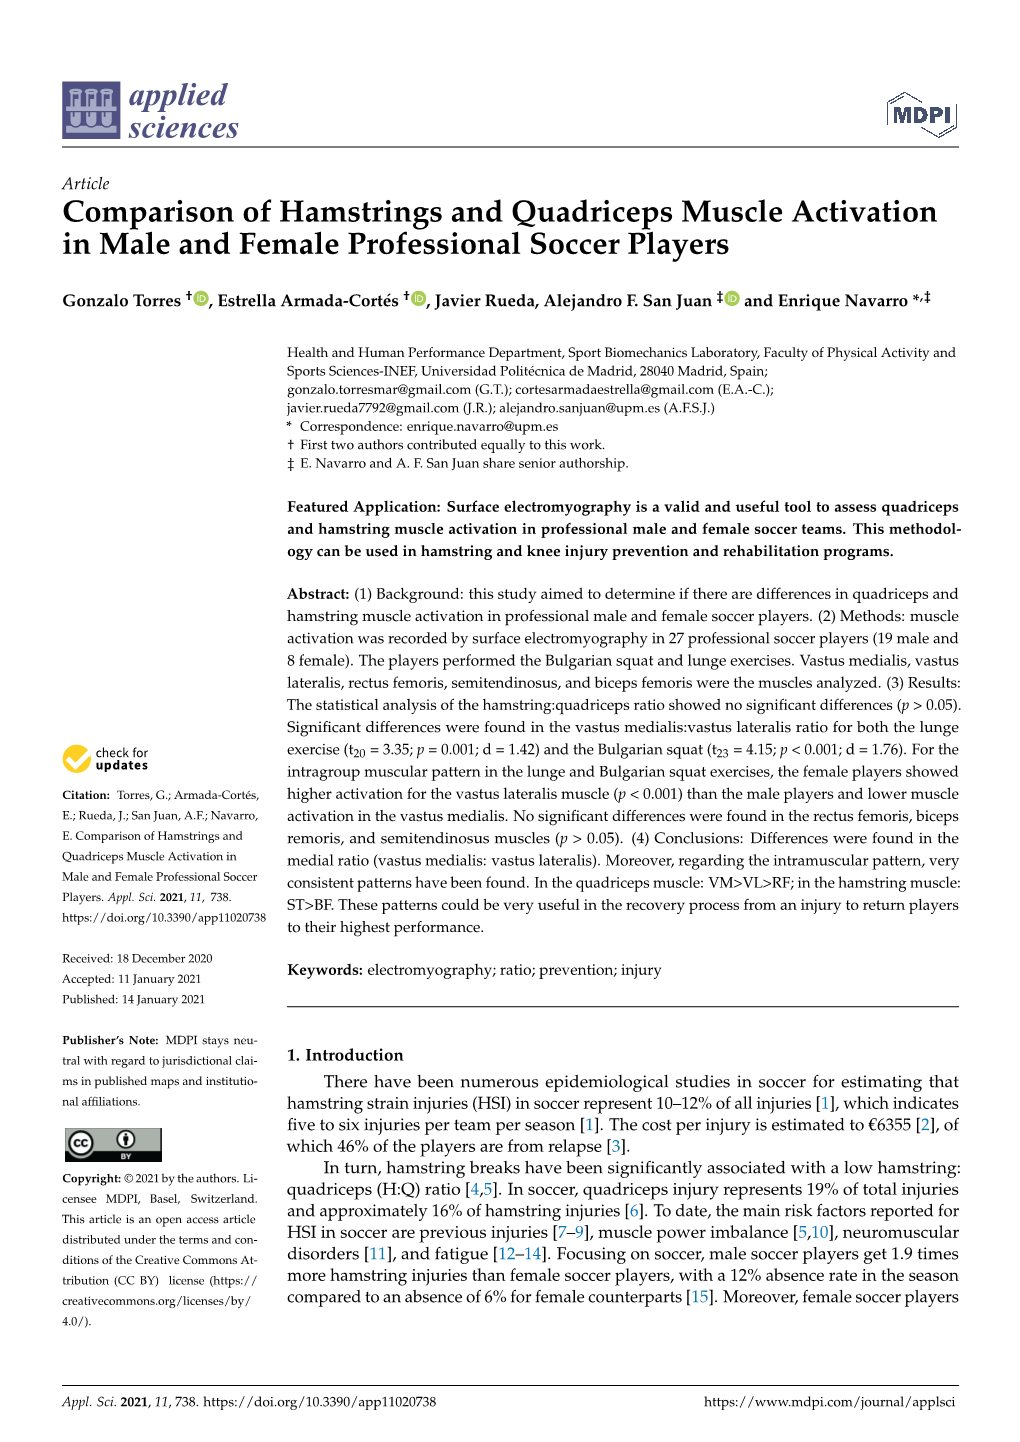 Comparison of Hamstrings and Quadriceps Muscle Activation in Male and Female Professional Soccer Players